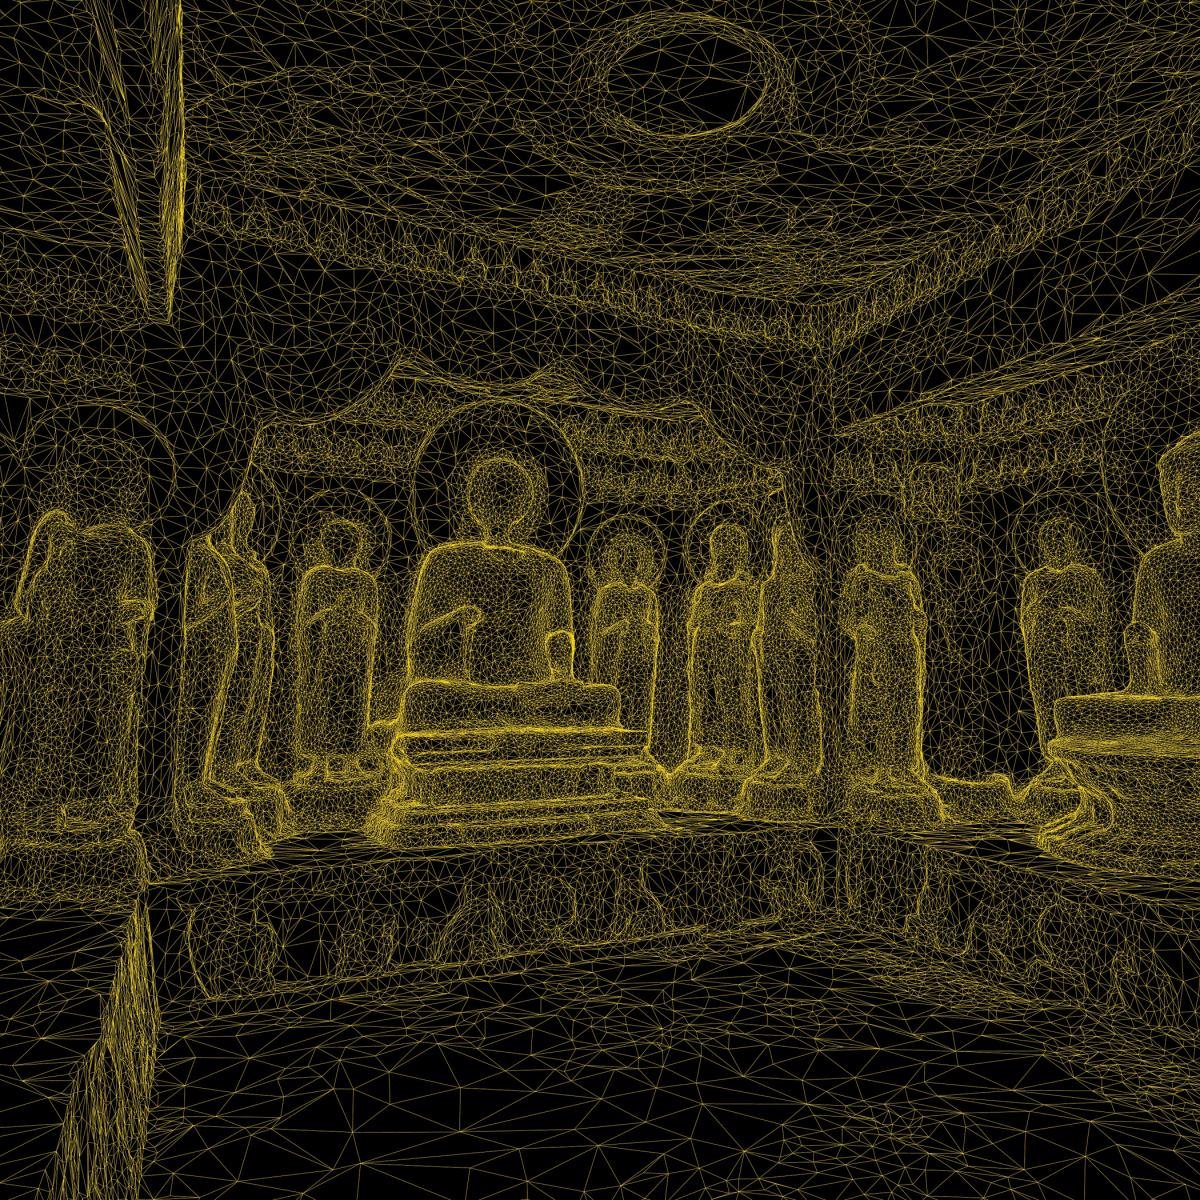 3-D rendering of a Buddhist temple